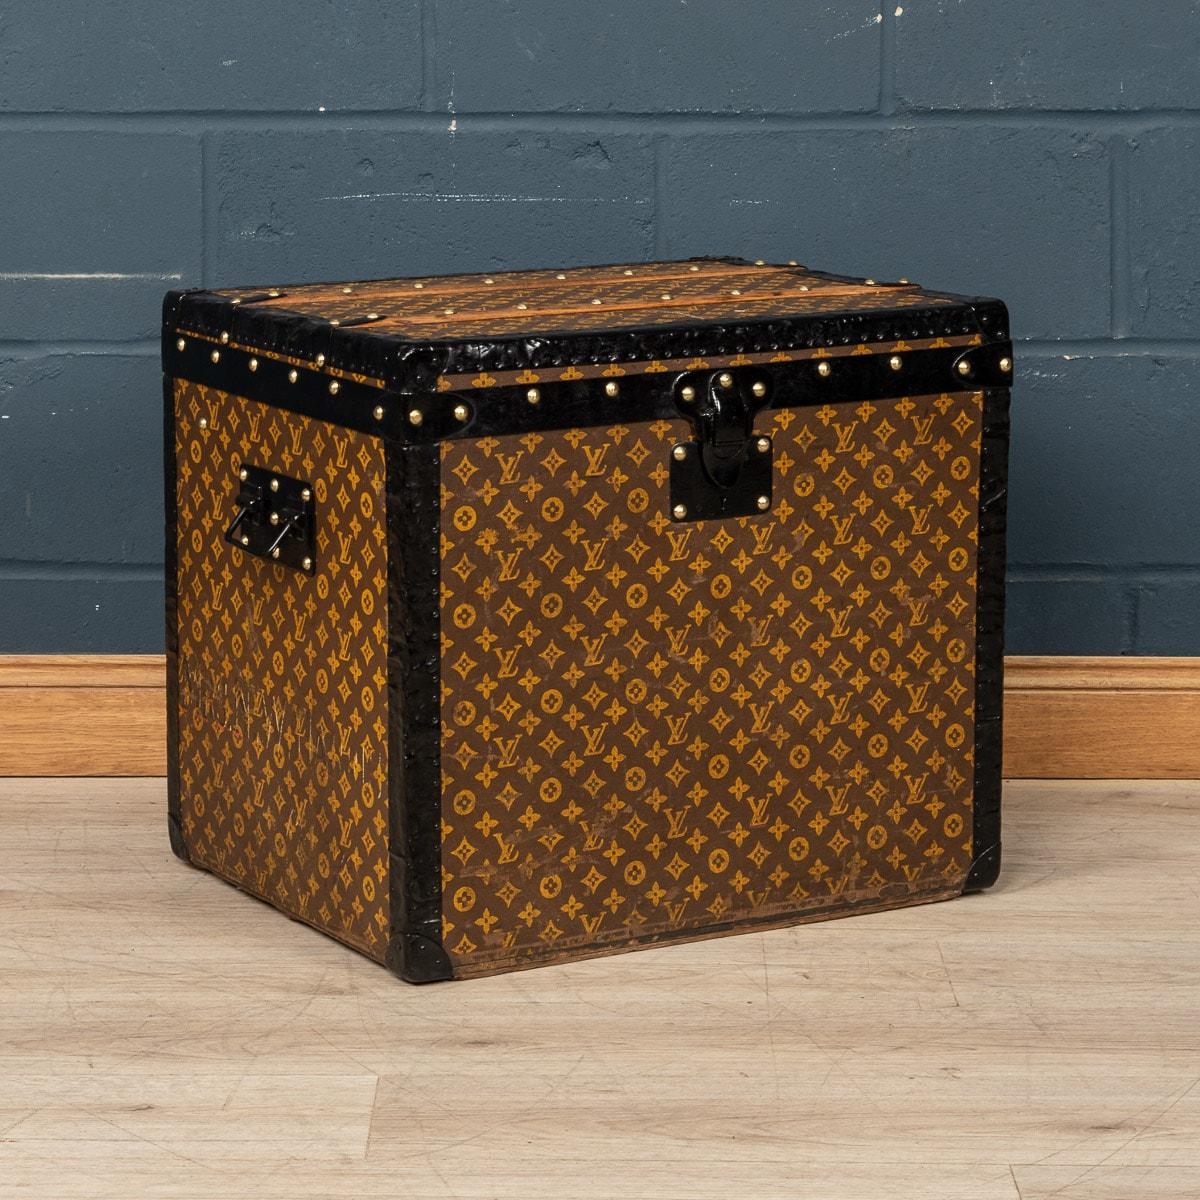 A superb example of an early 20th century Louis Vuitton hat trunk in the world famous monogrammed LV canvas. This unusually sized trunk is in very good condition and harks back to times of passenger ships and 1st class travel of bygone eras. A